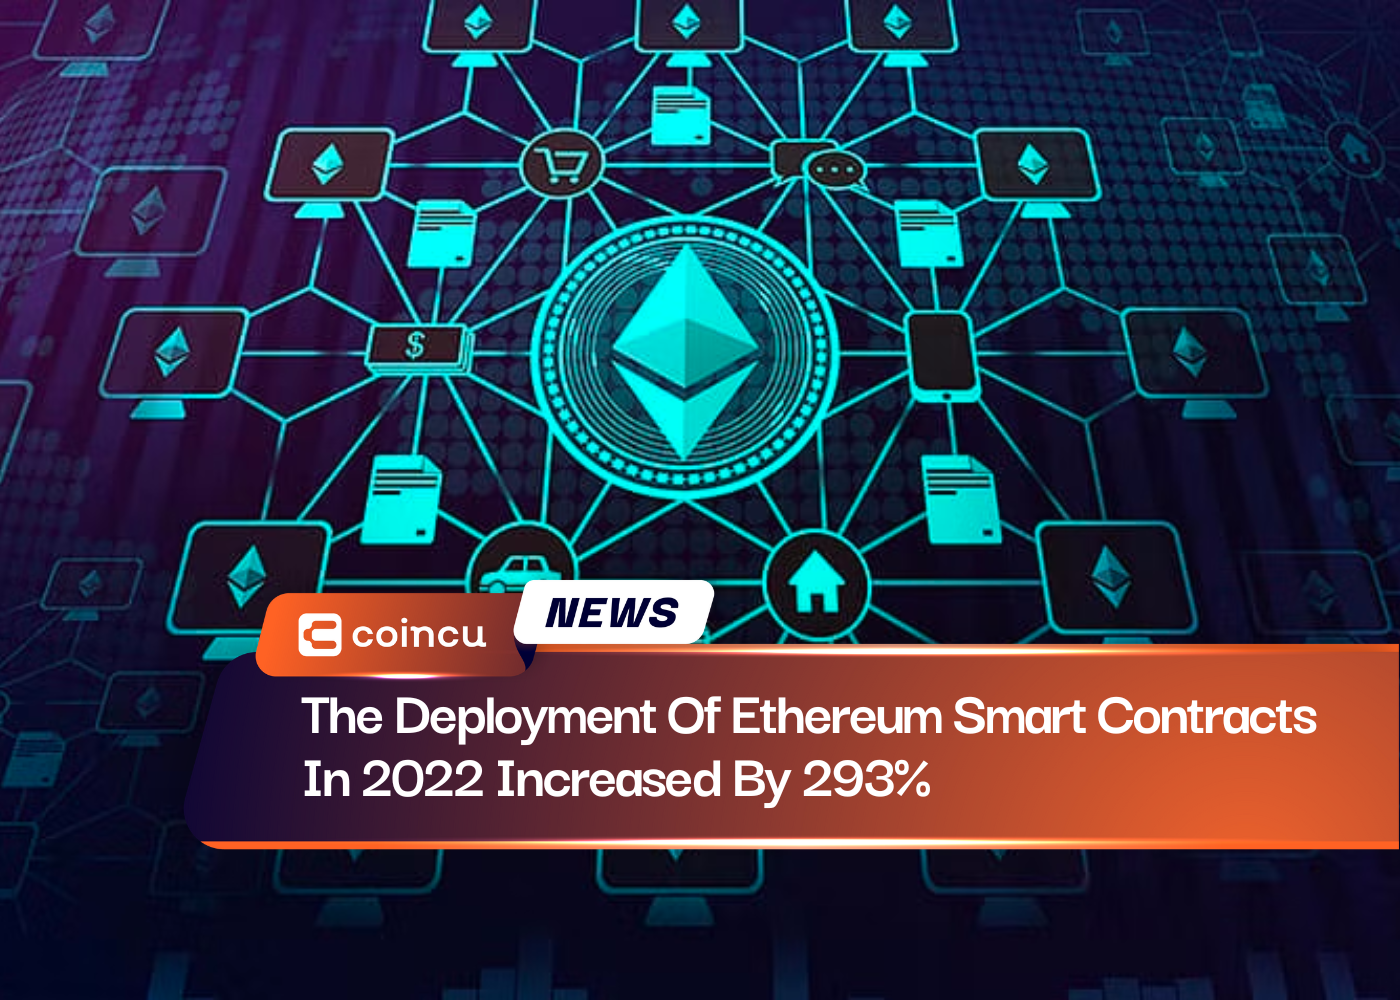 The Deployment Of Ethereum Smart Contracts In 2022 Increased By 293%